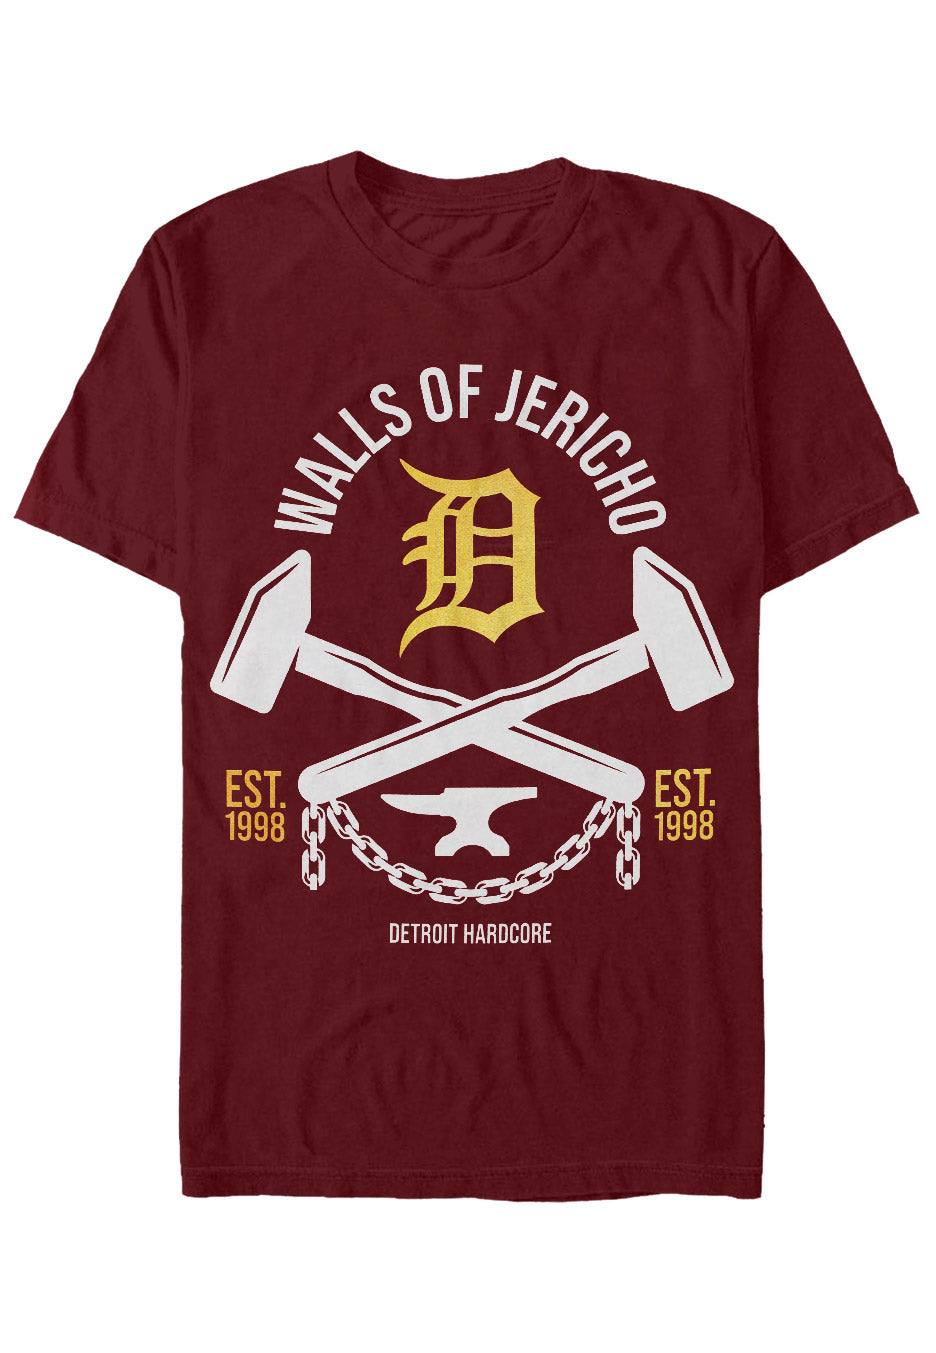 Walls Of Jericho - Crossed Hammers Maroon - T-Shirt | Neutral-Image